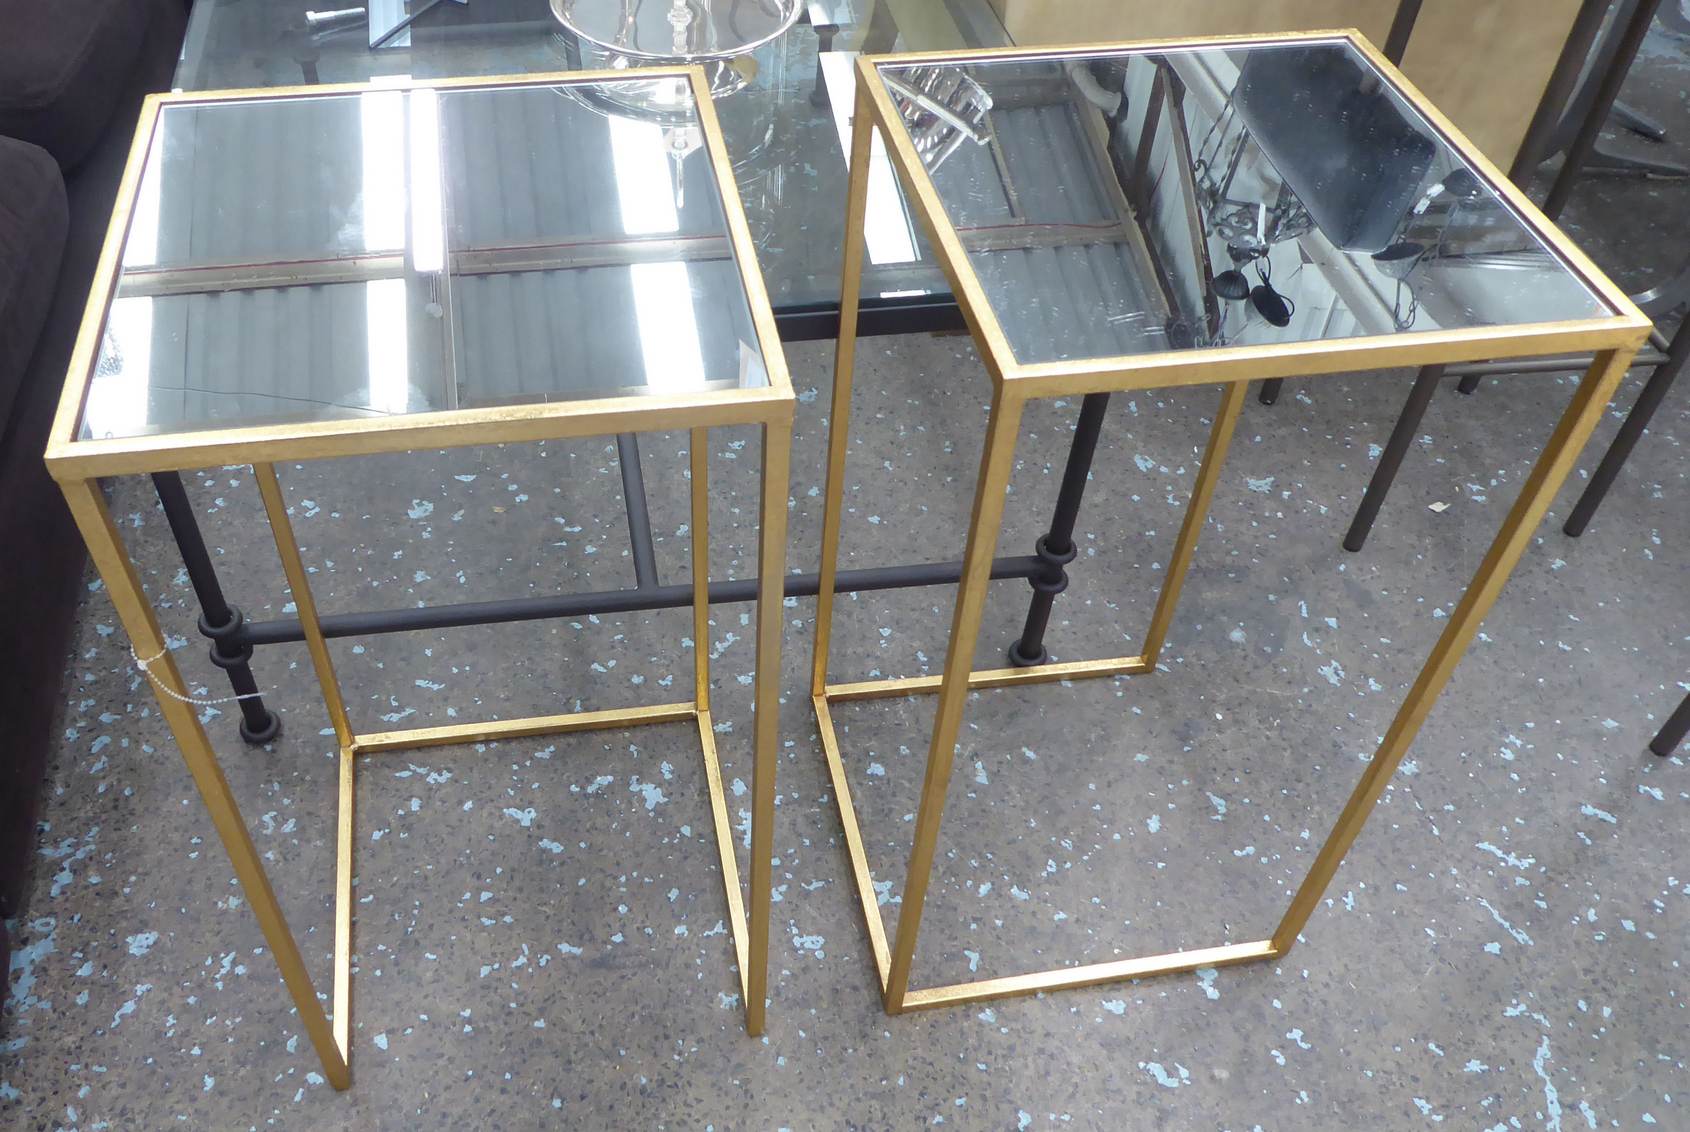 SIDE TABLES, two, gilt metal frames with mirrored inserts, 67cm H x 35cm x 35cm.